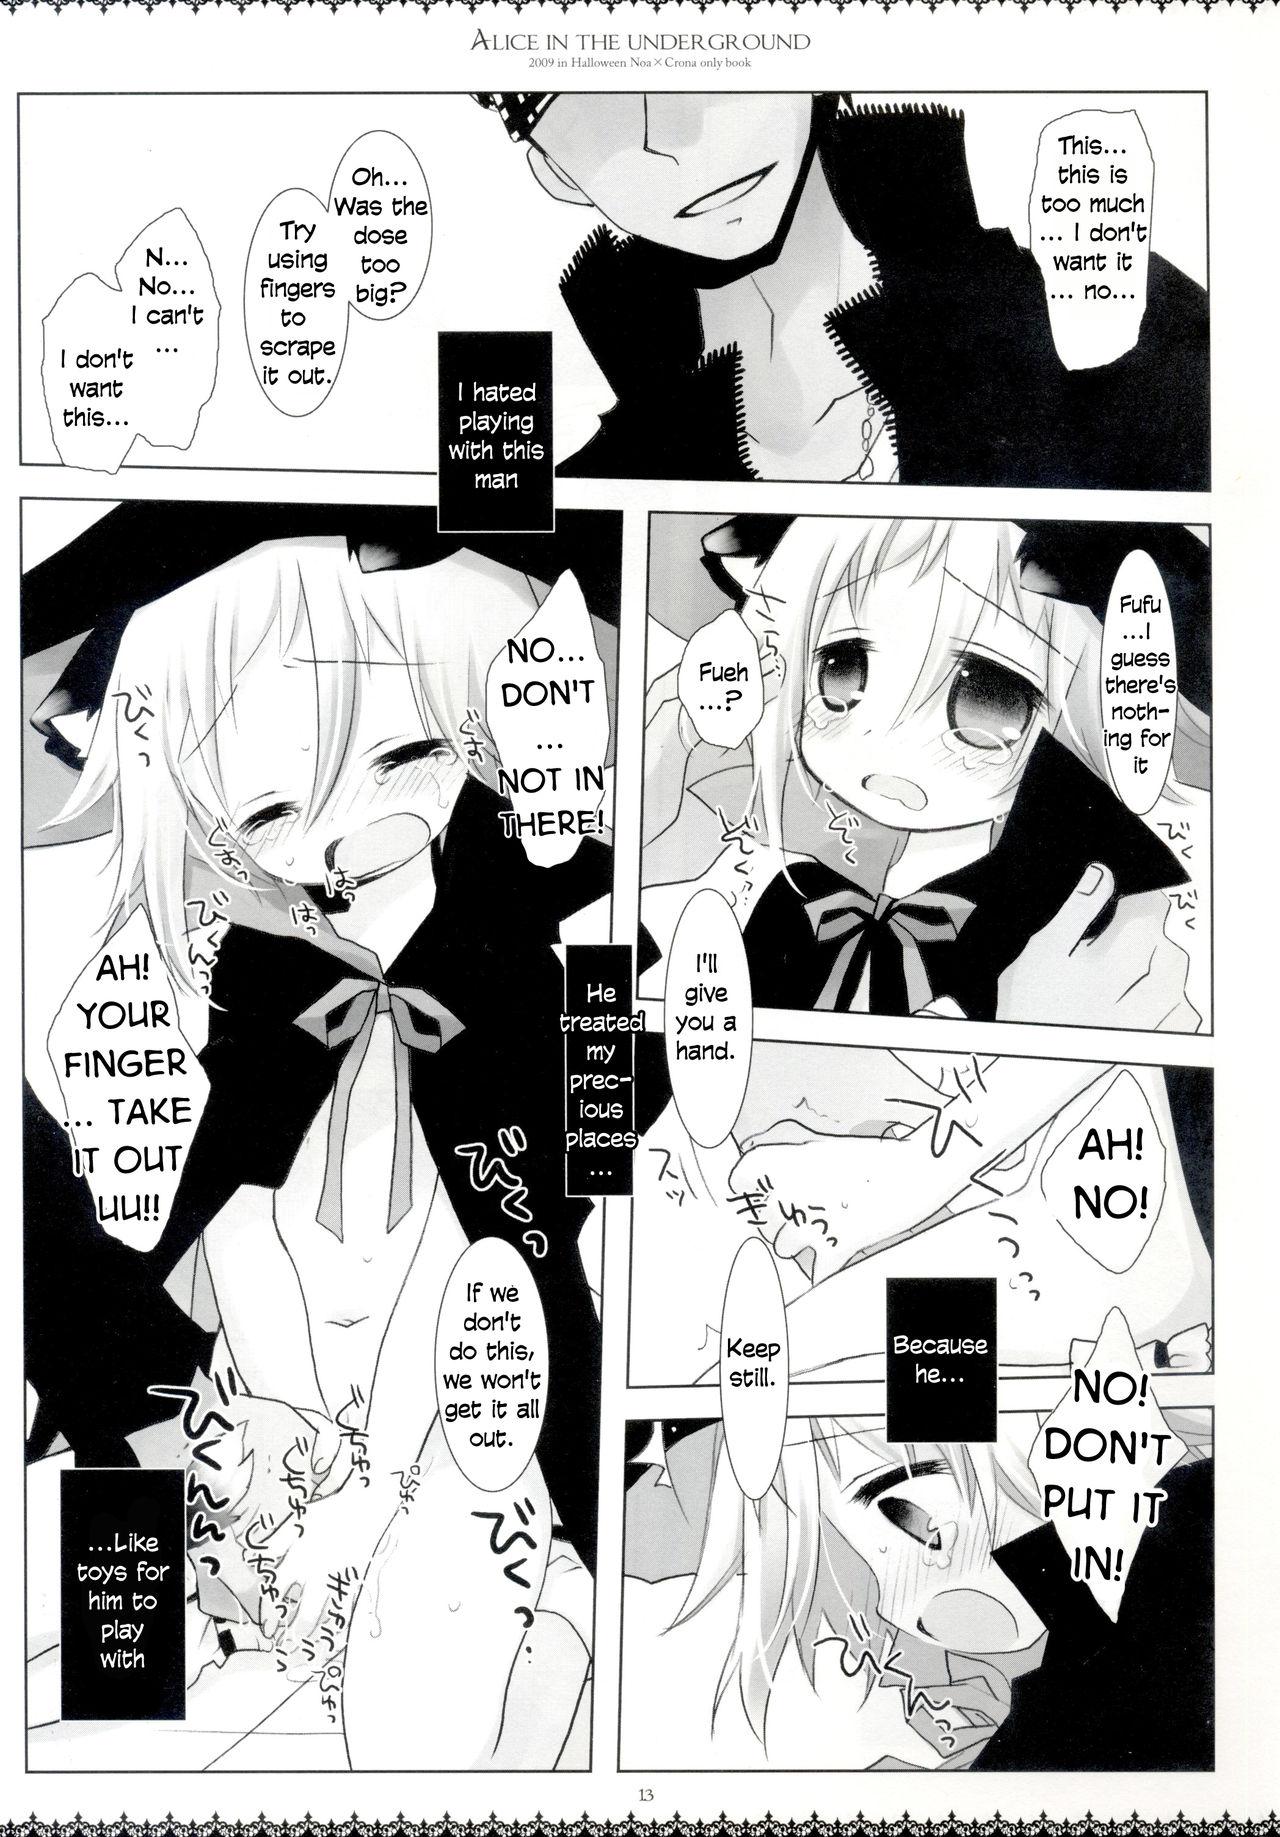 Pija Alice in the underground - Soul eater Gay Anal - Page 12